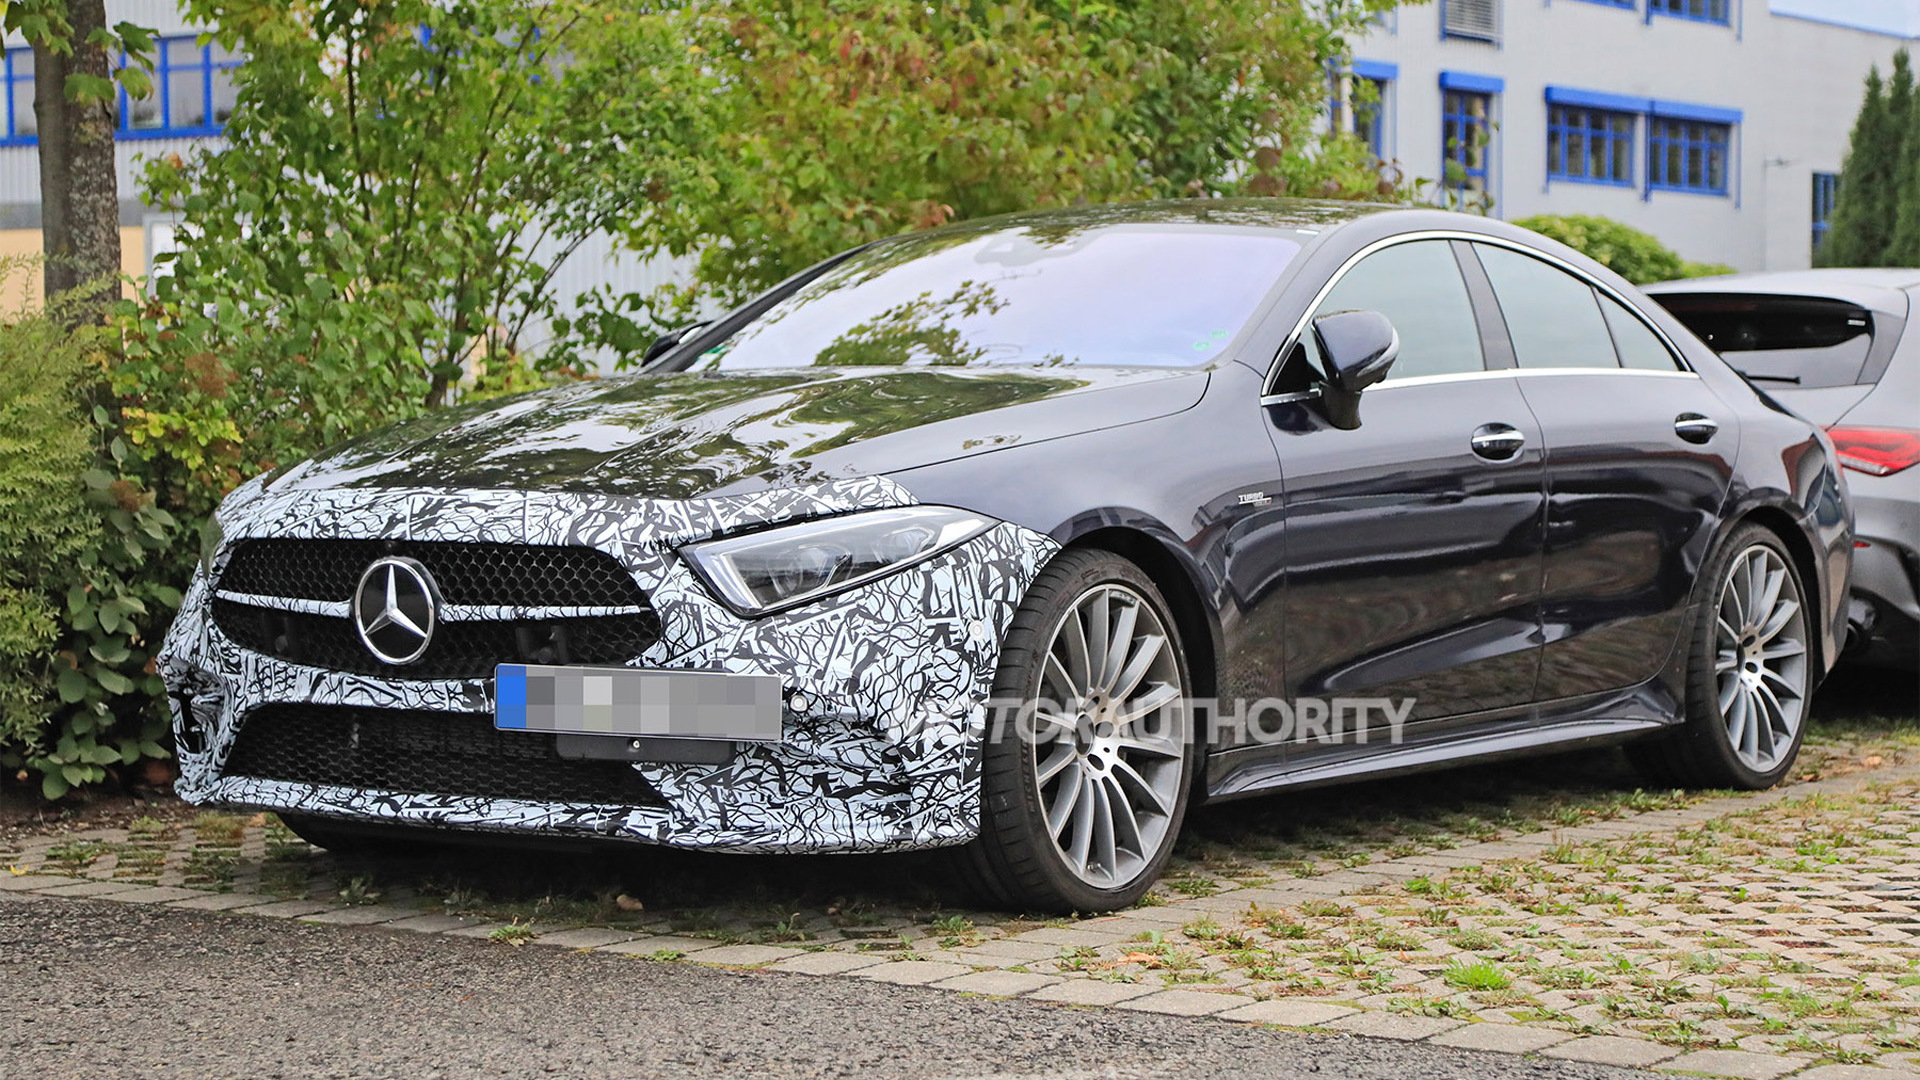 2023 Mercedes-AMG CLS53 spy shots: Mild update for the original coupe